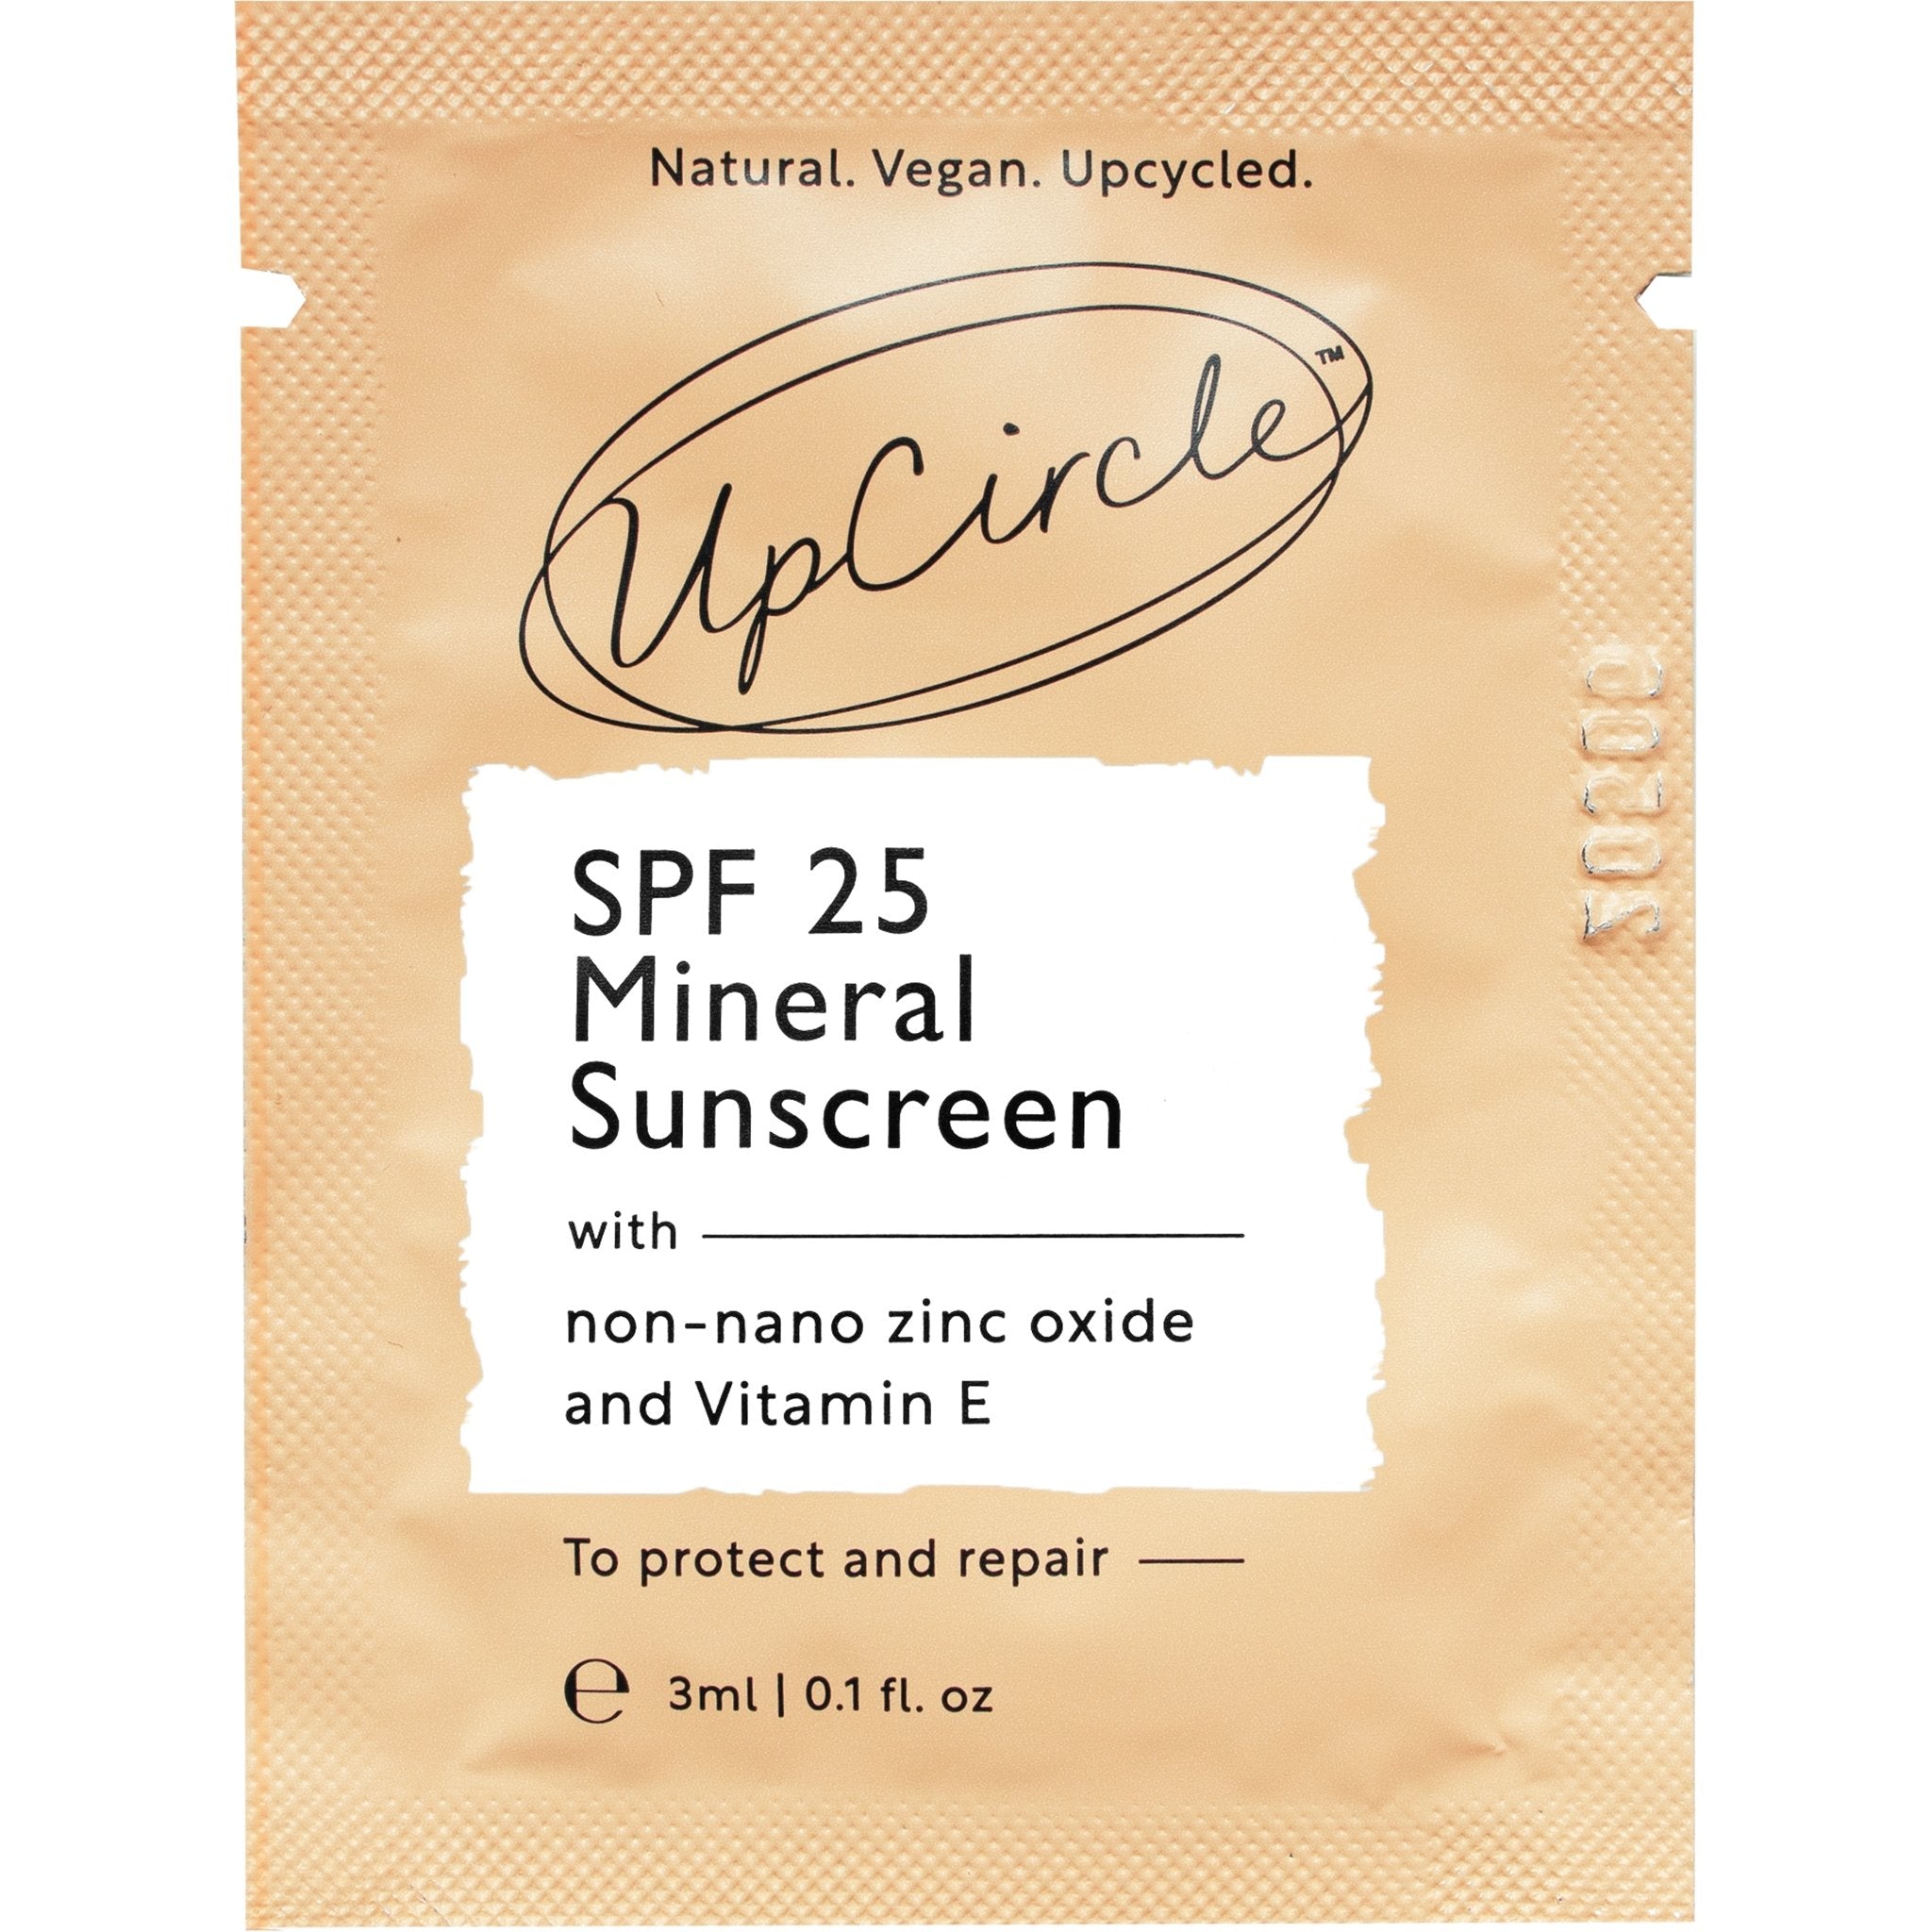 NEW SPF 25 Mineral Sunscreen - mypure.co.uk